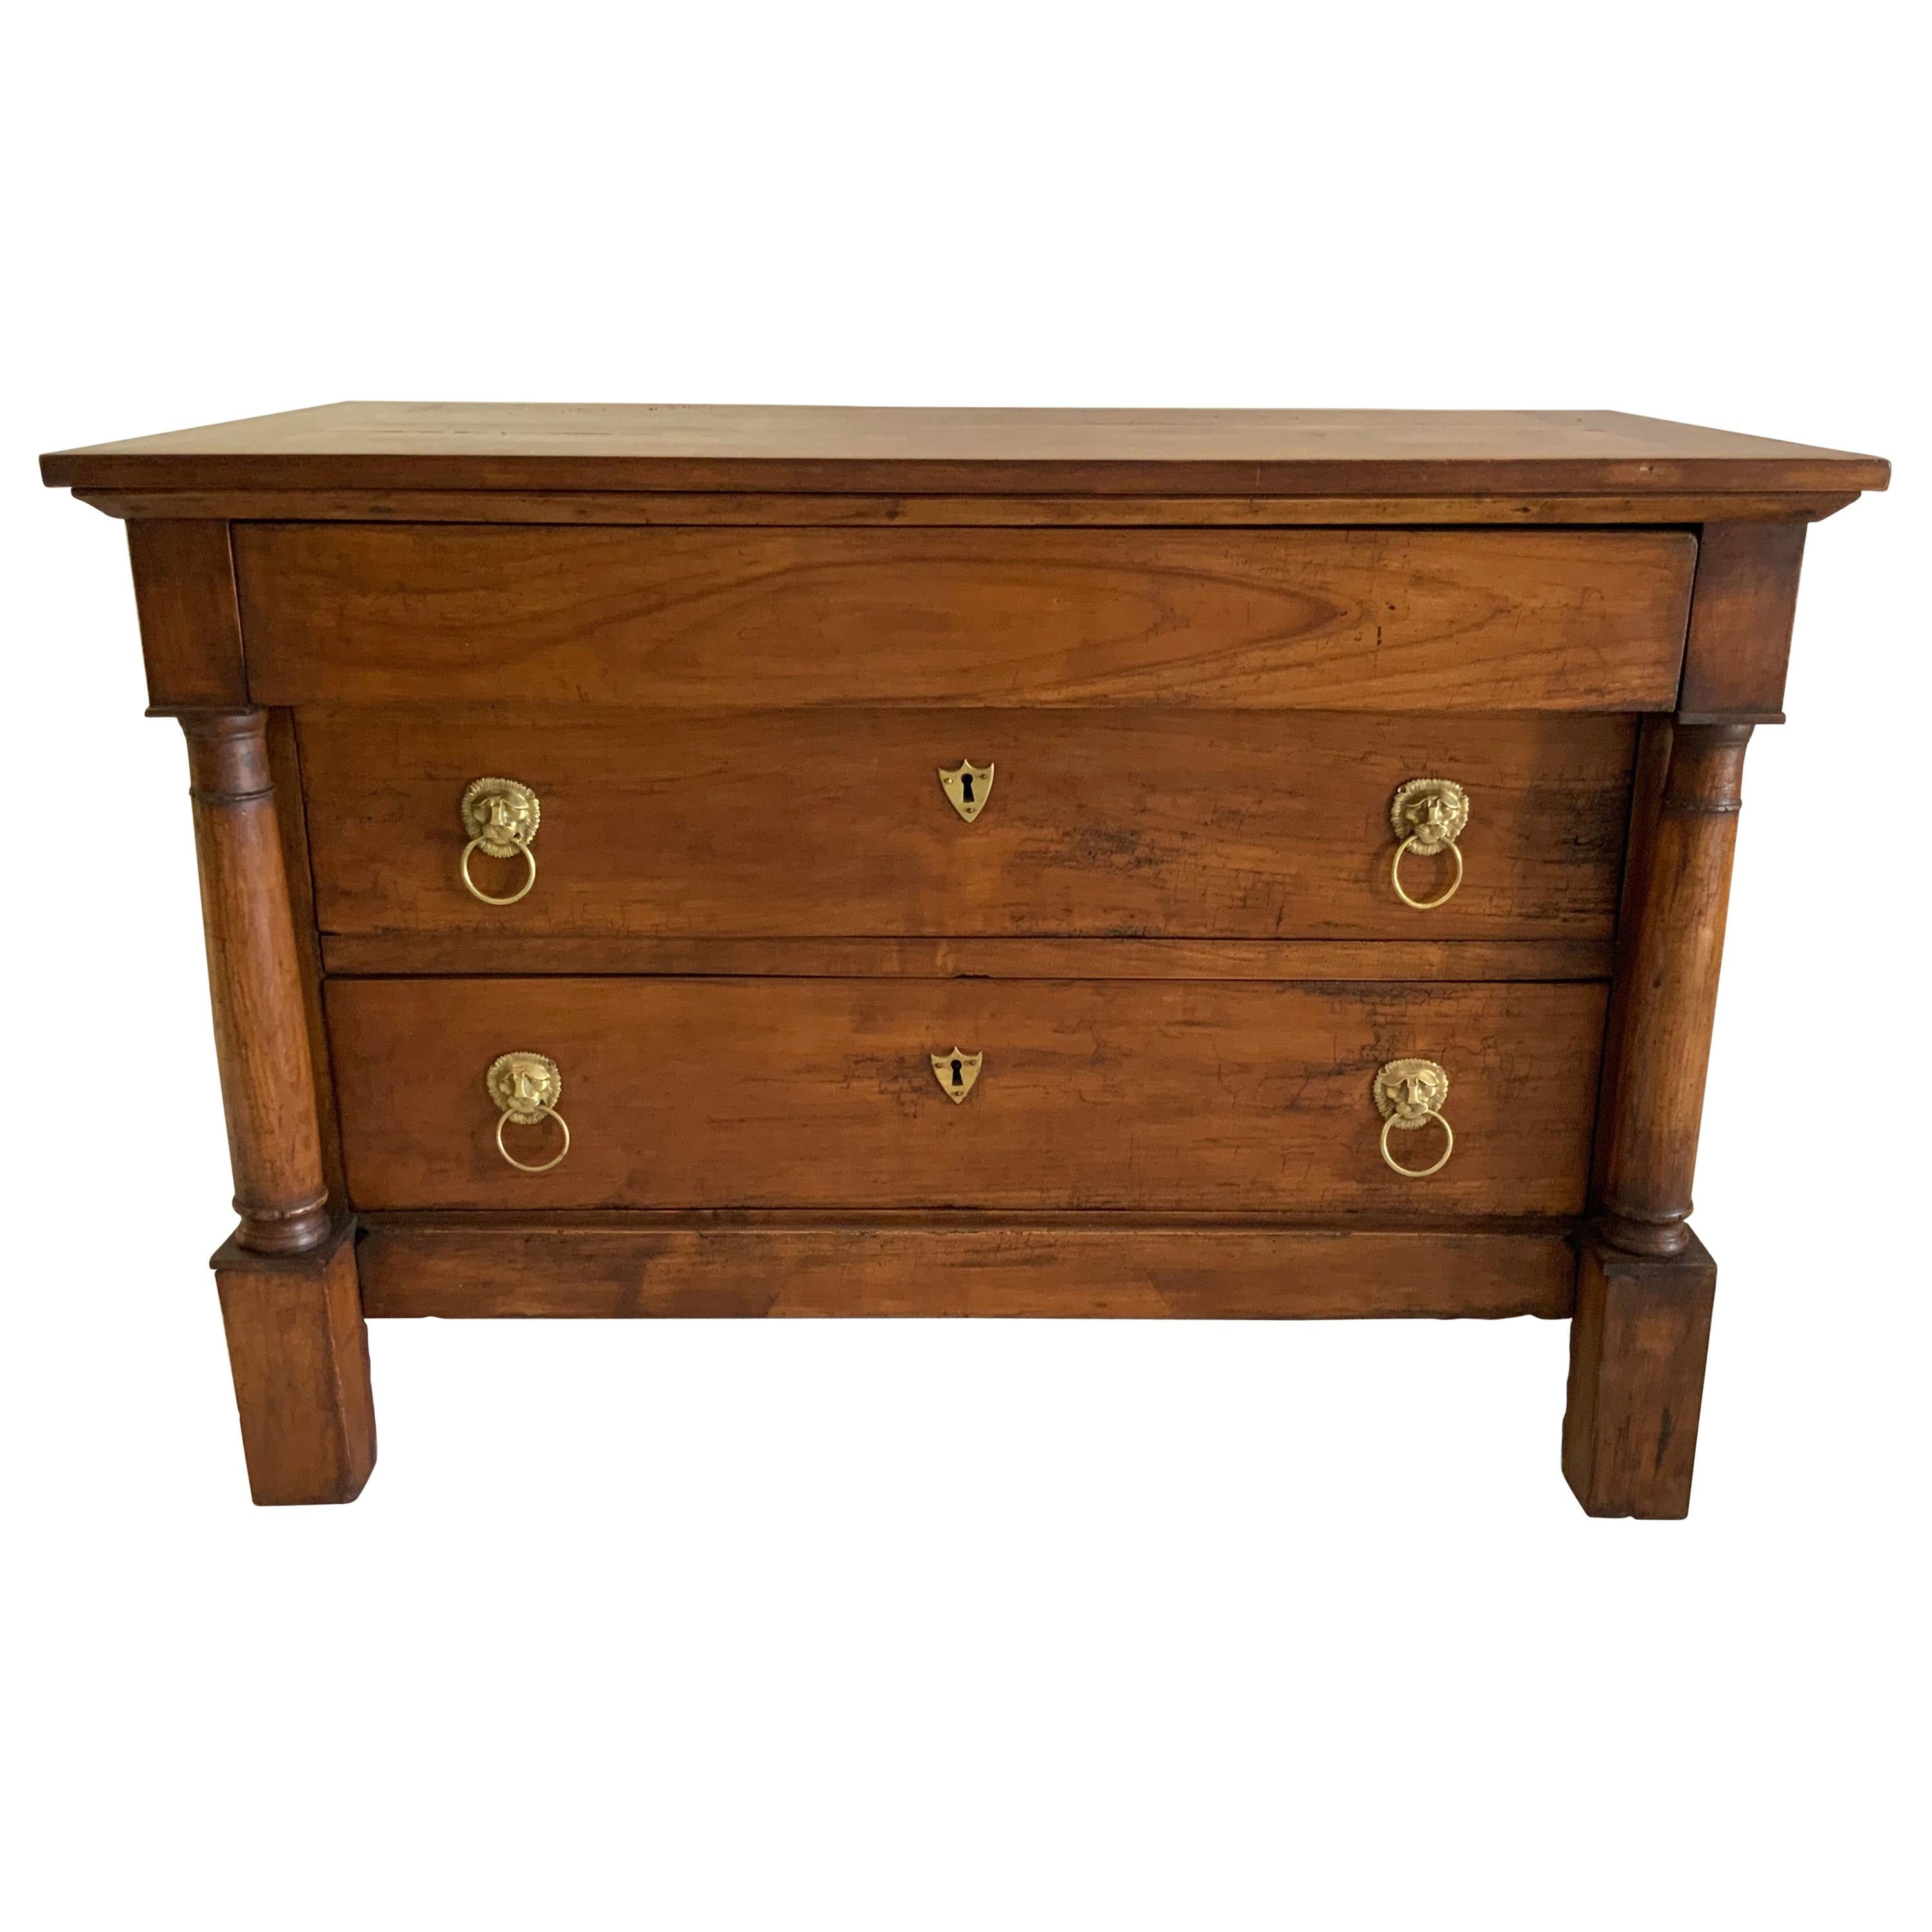 French Varnished Commode, Empire Style Mid-19th Century, in Walnut